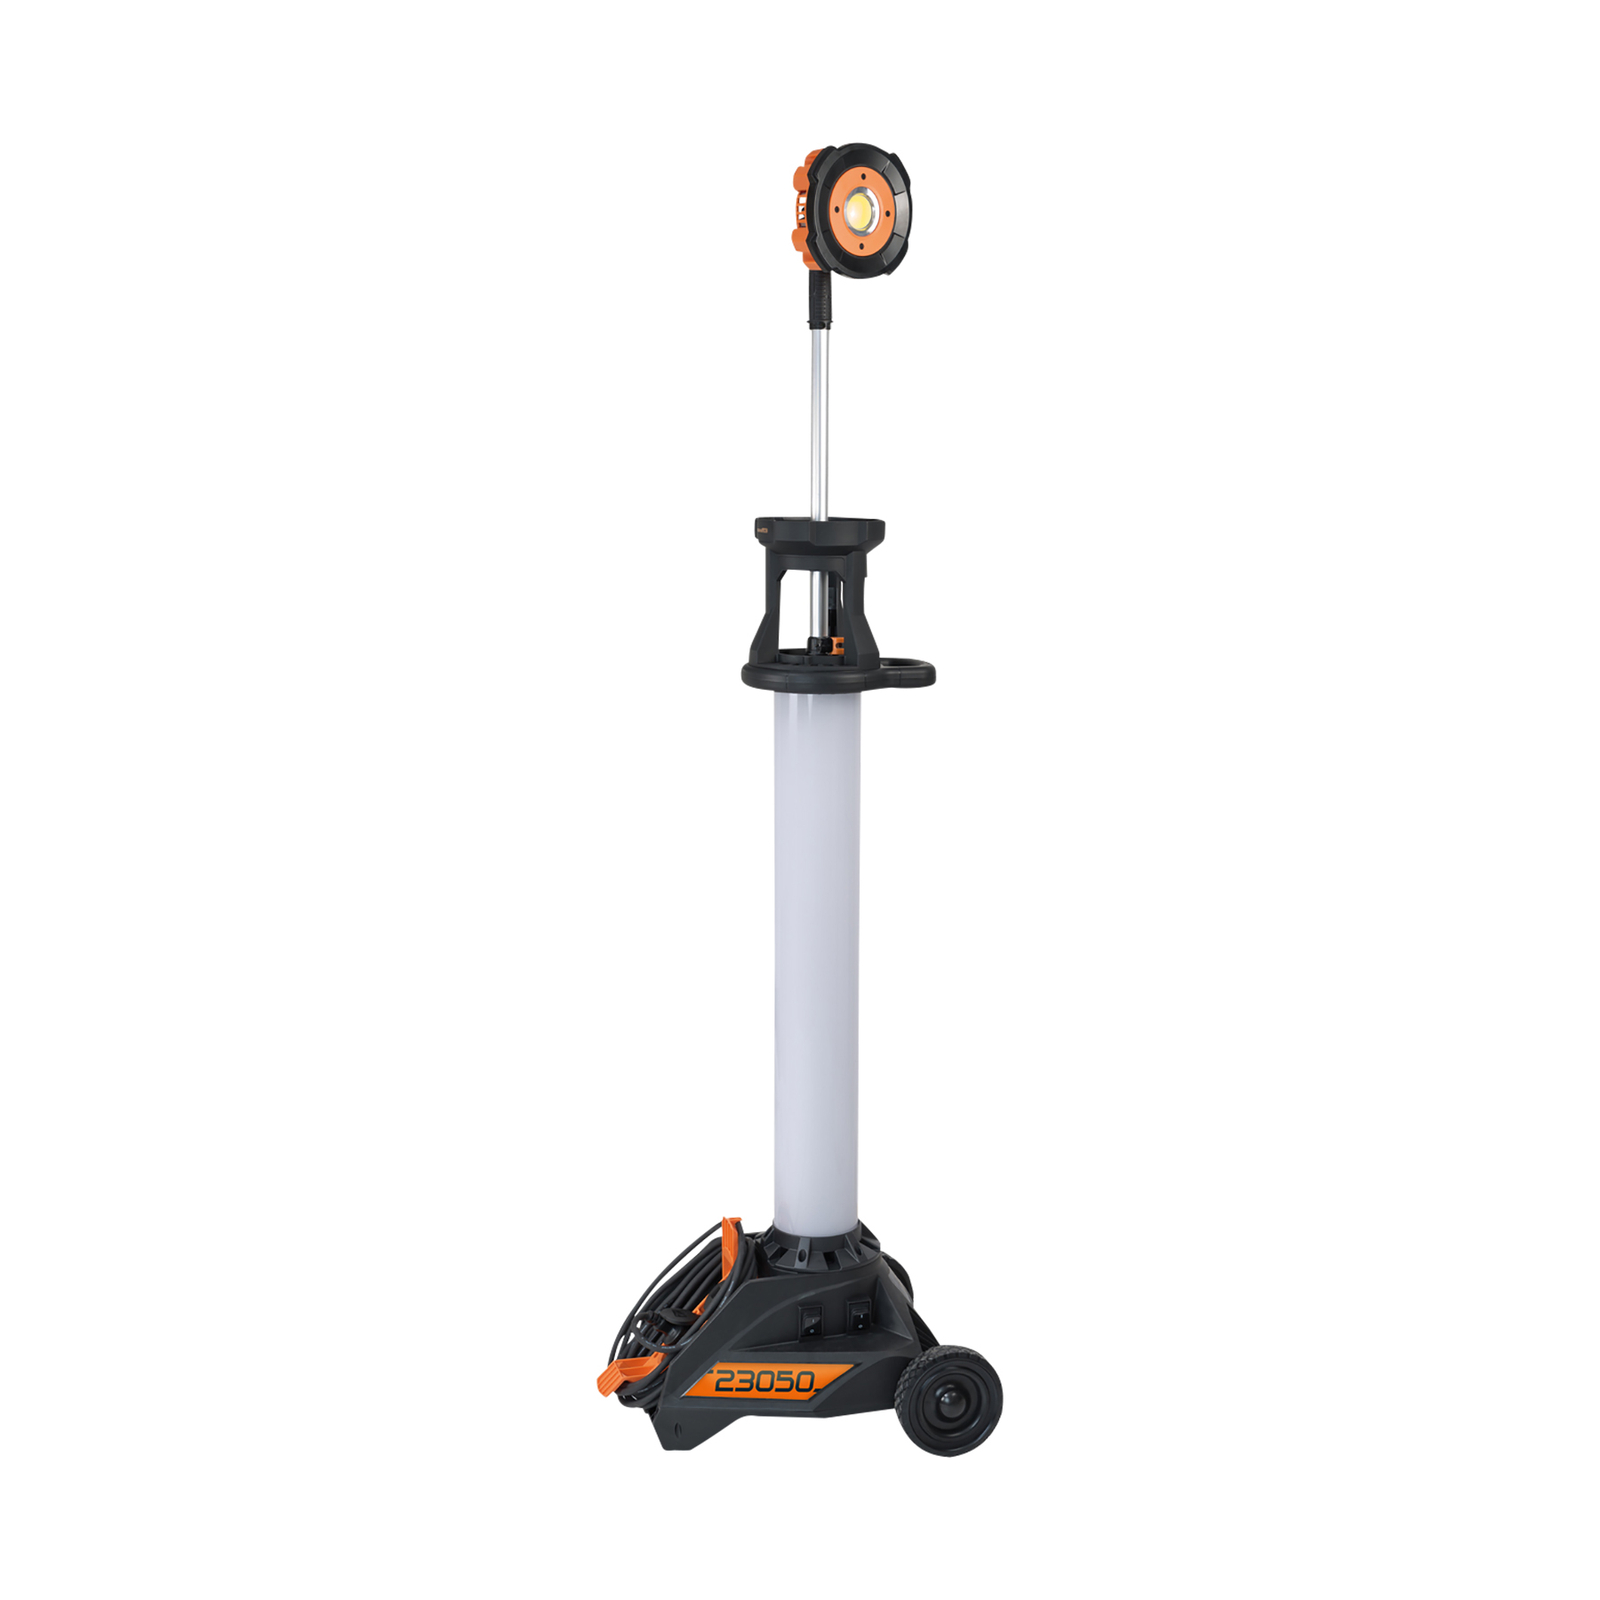 TU23050 M LED floodlight transportable with a spot